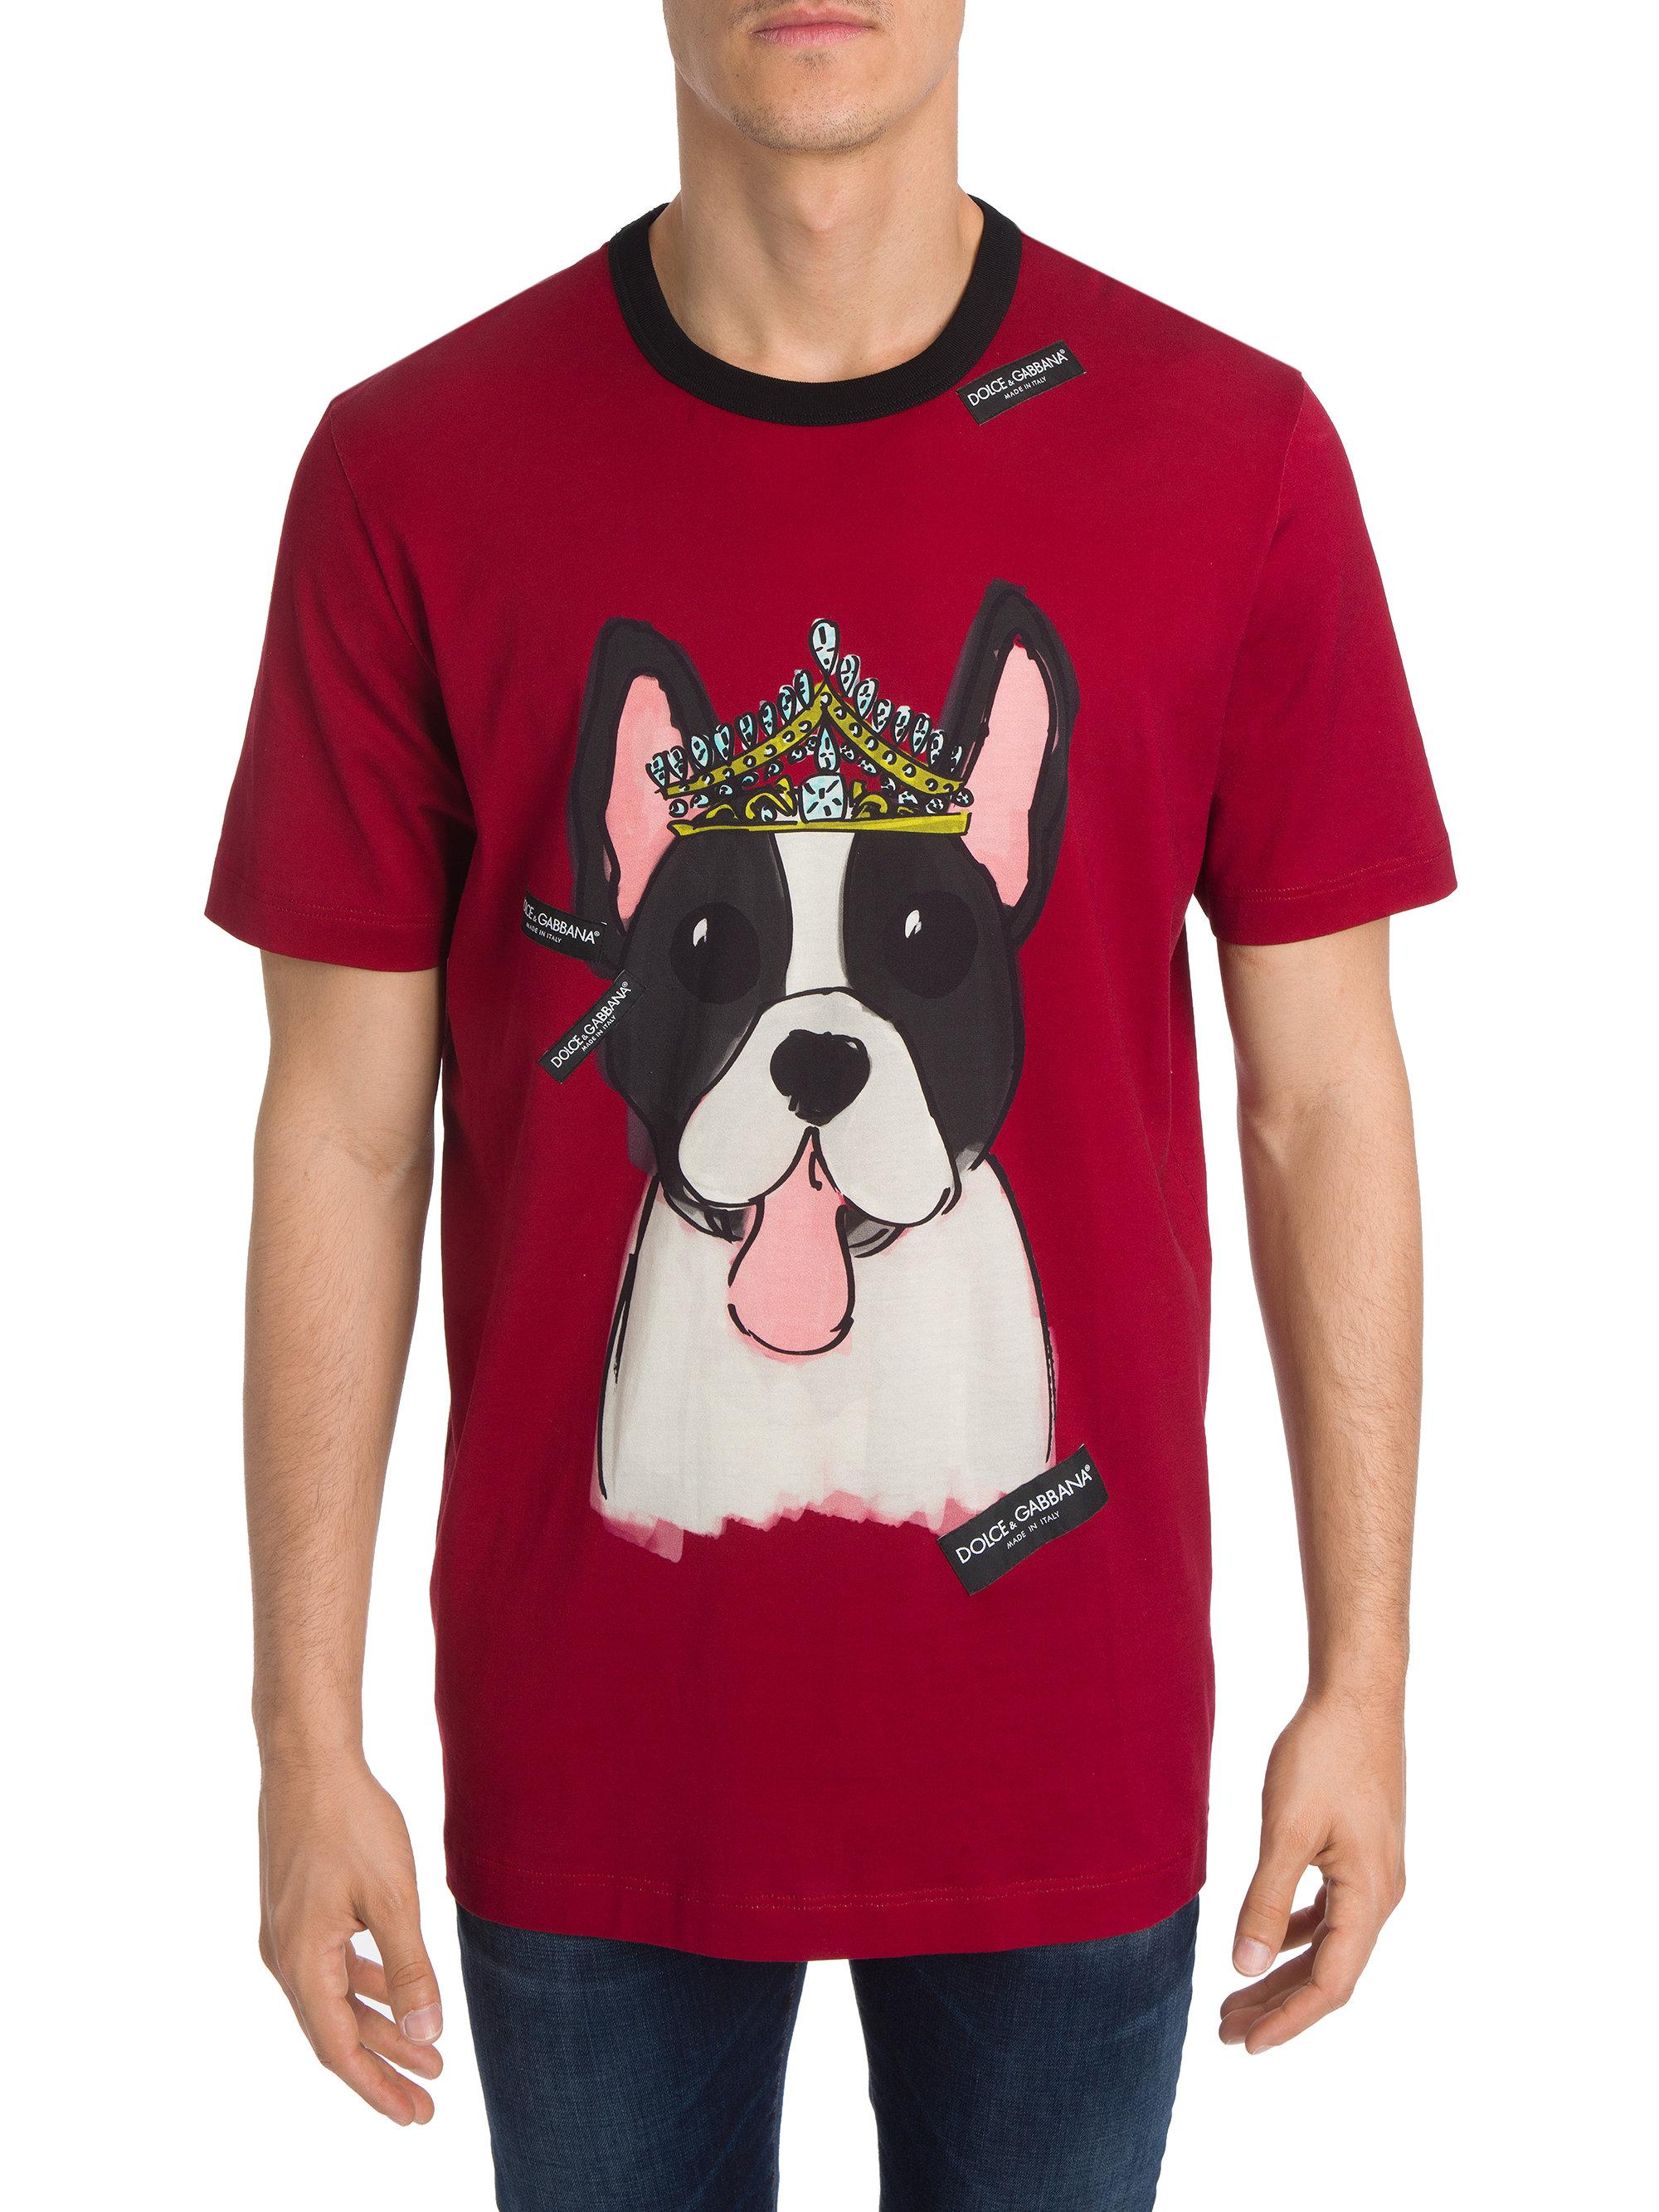 Lyst - Dolce & Gabbana Dog Cotton Tee in Red for Men